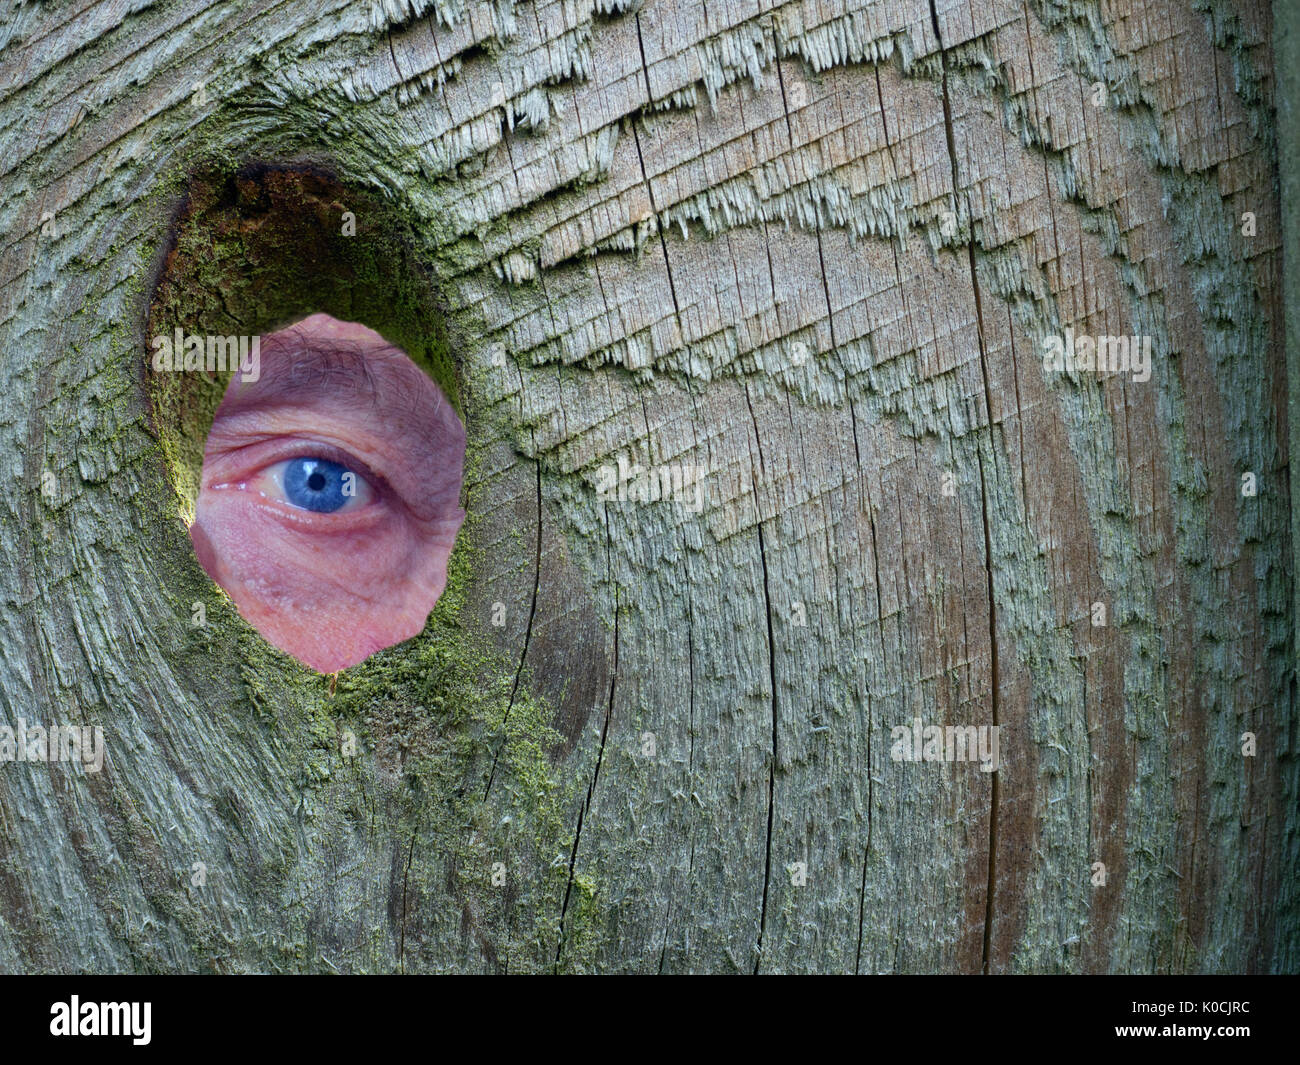 Man looking through Knot hole in garden fence at private garden(posed by the photographer) Stock Photo